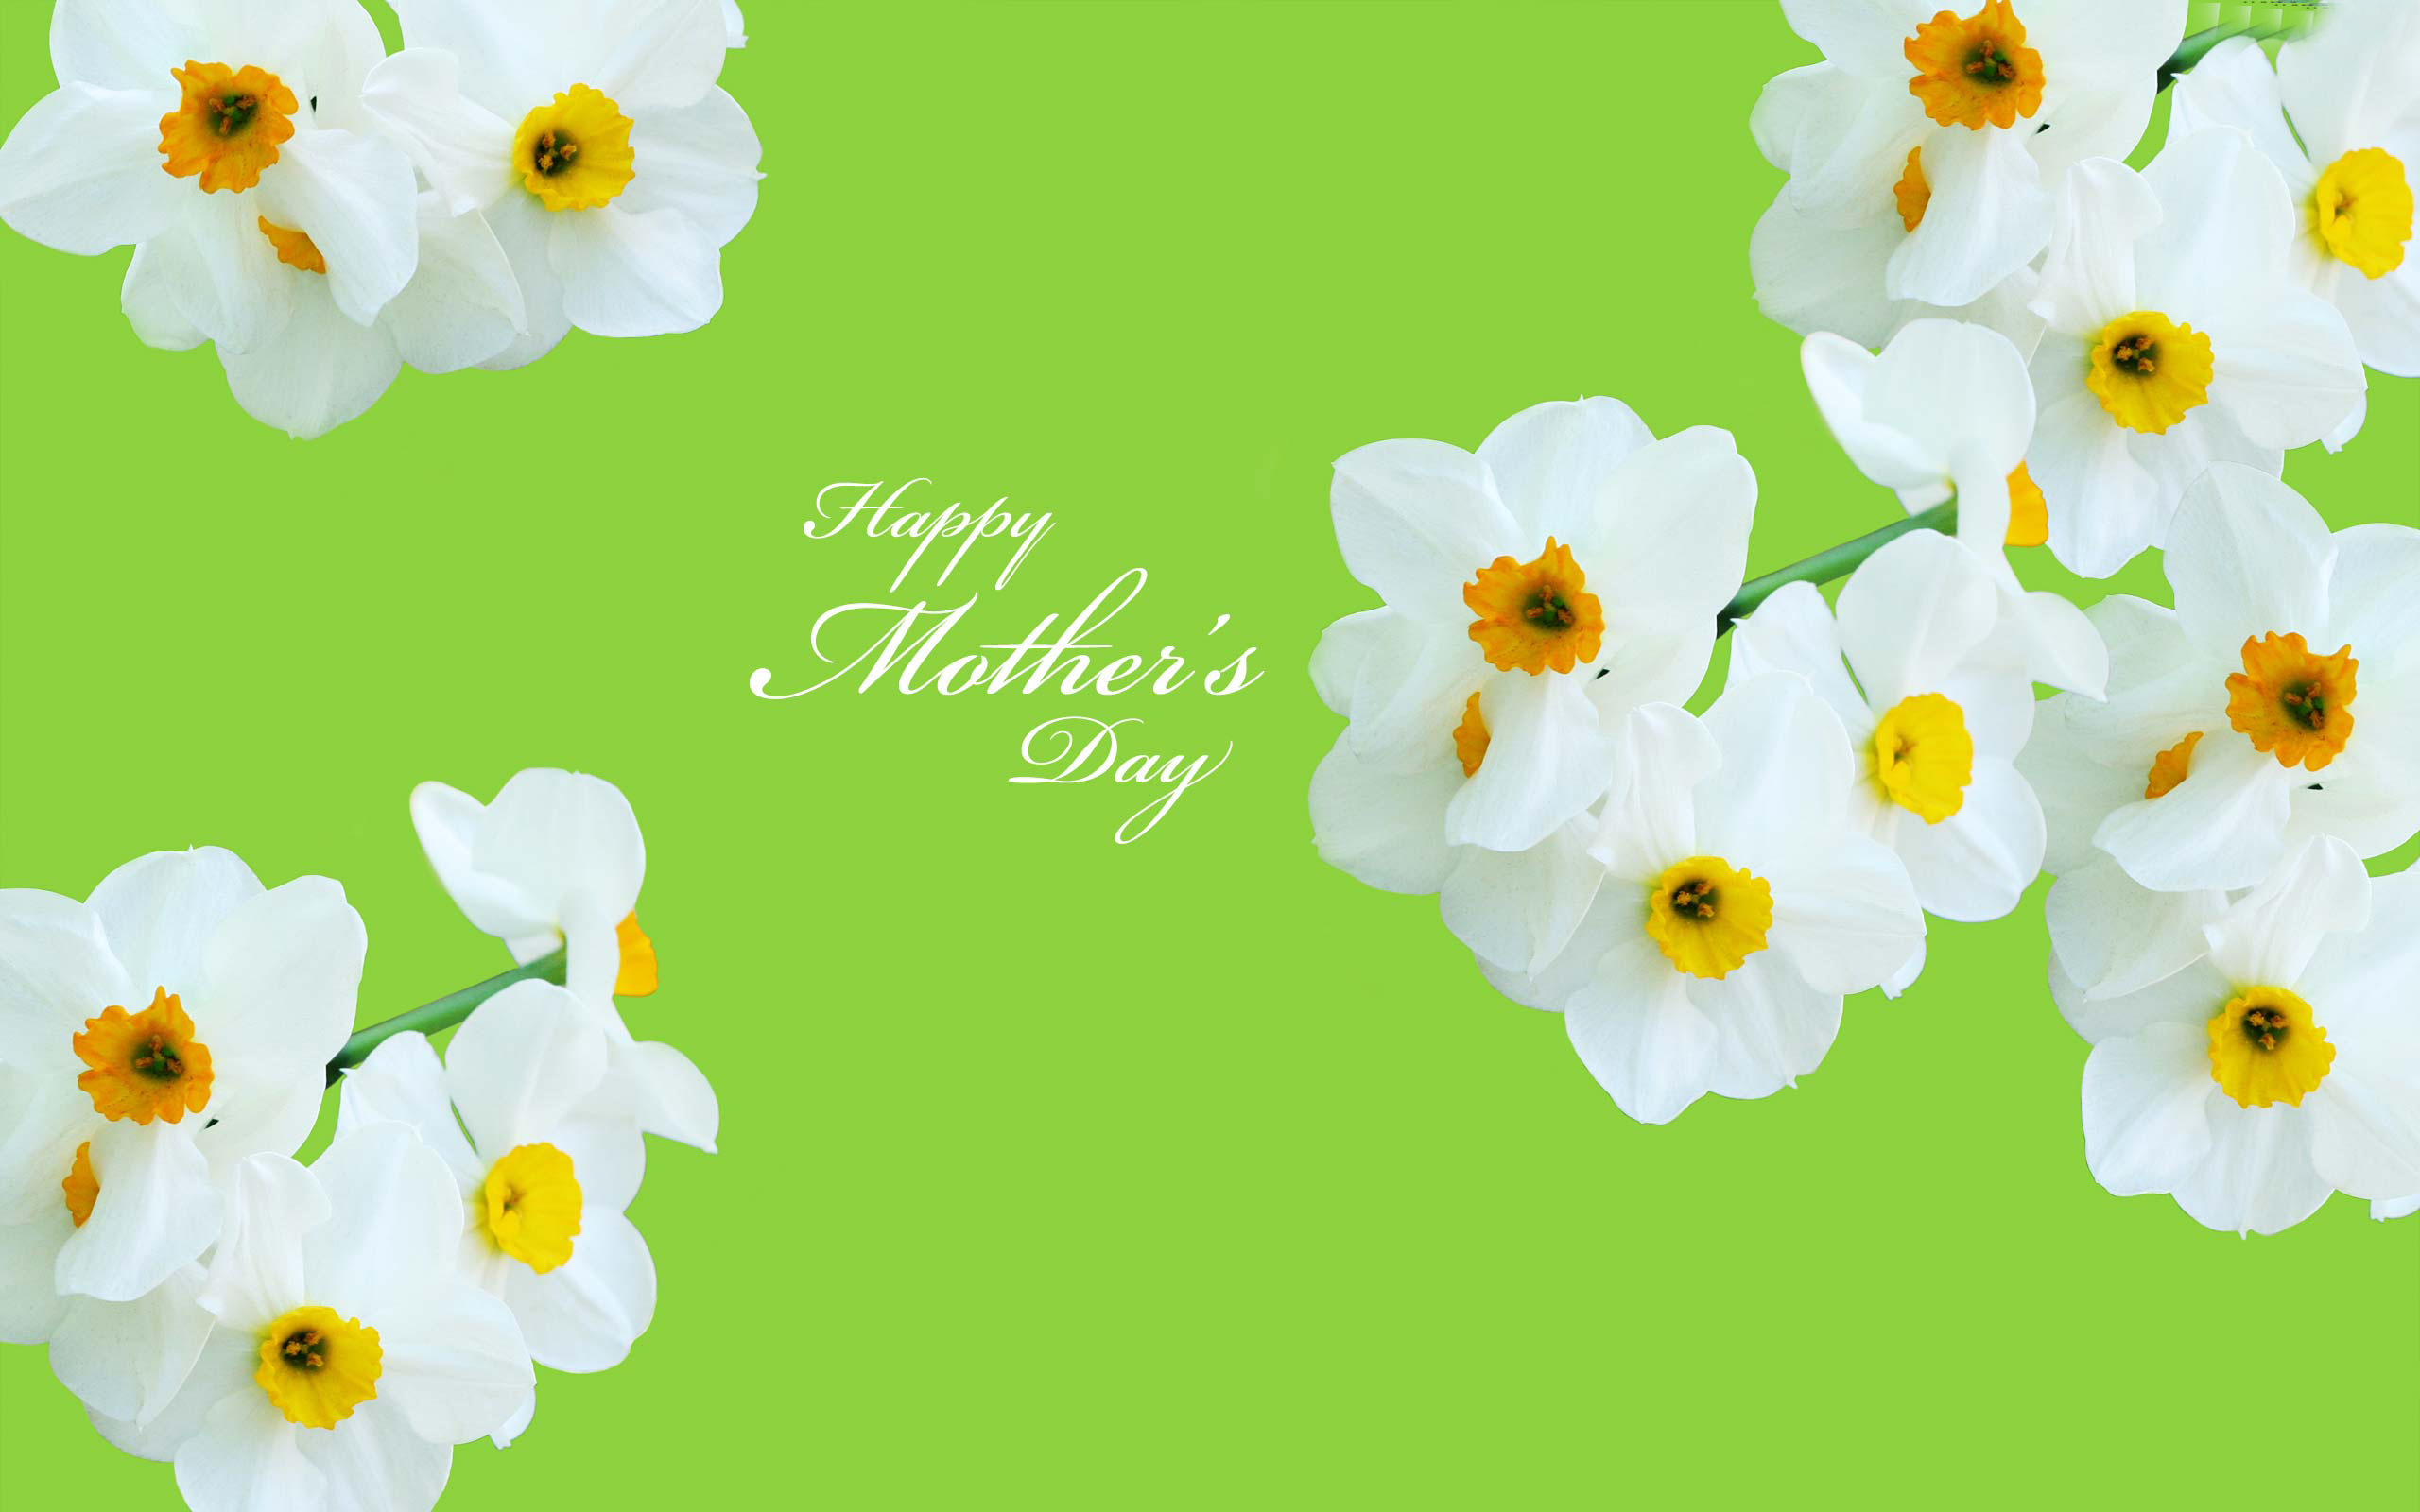 Happy Mothers Day Wallpaper High Definition Quality